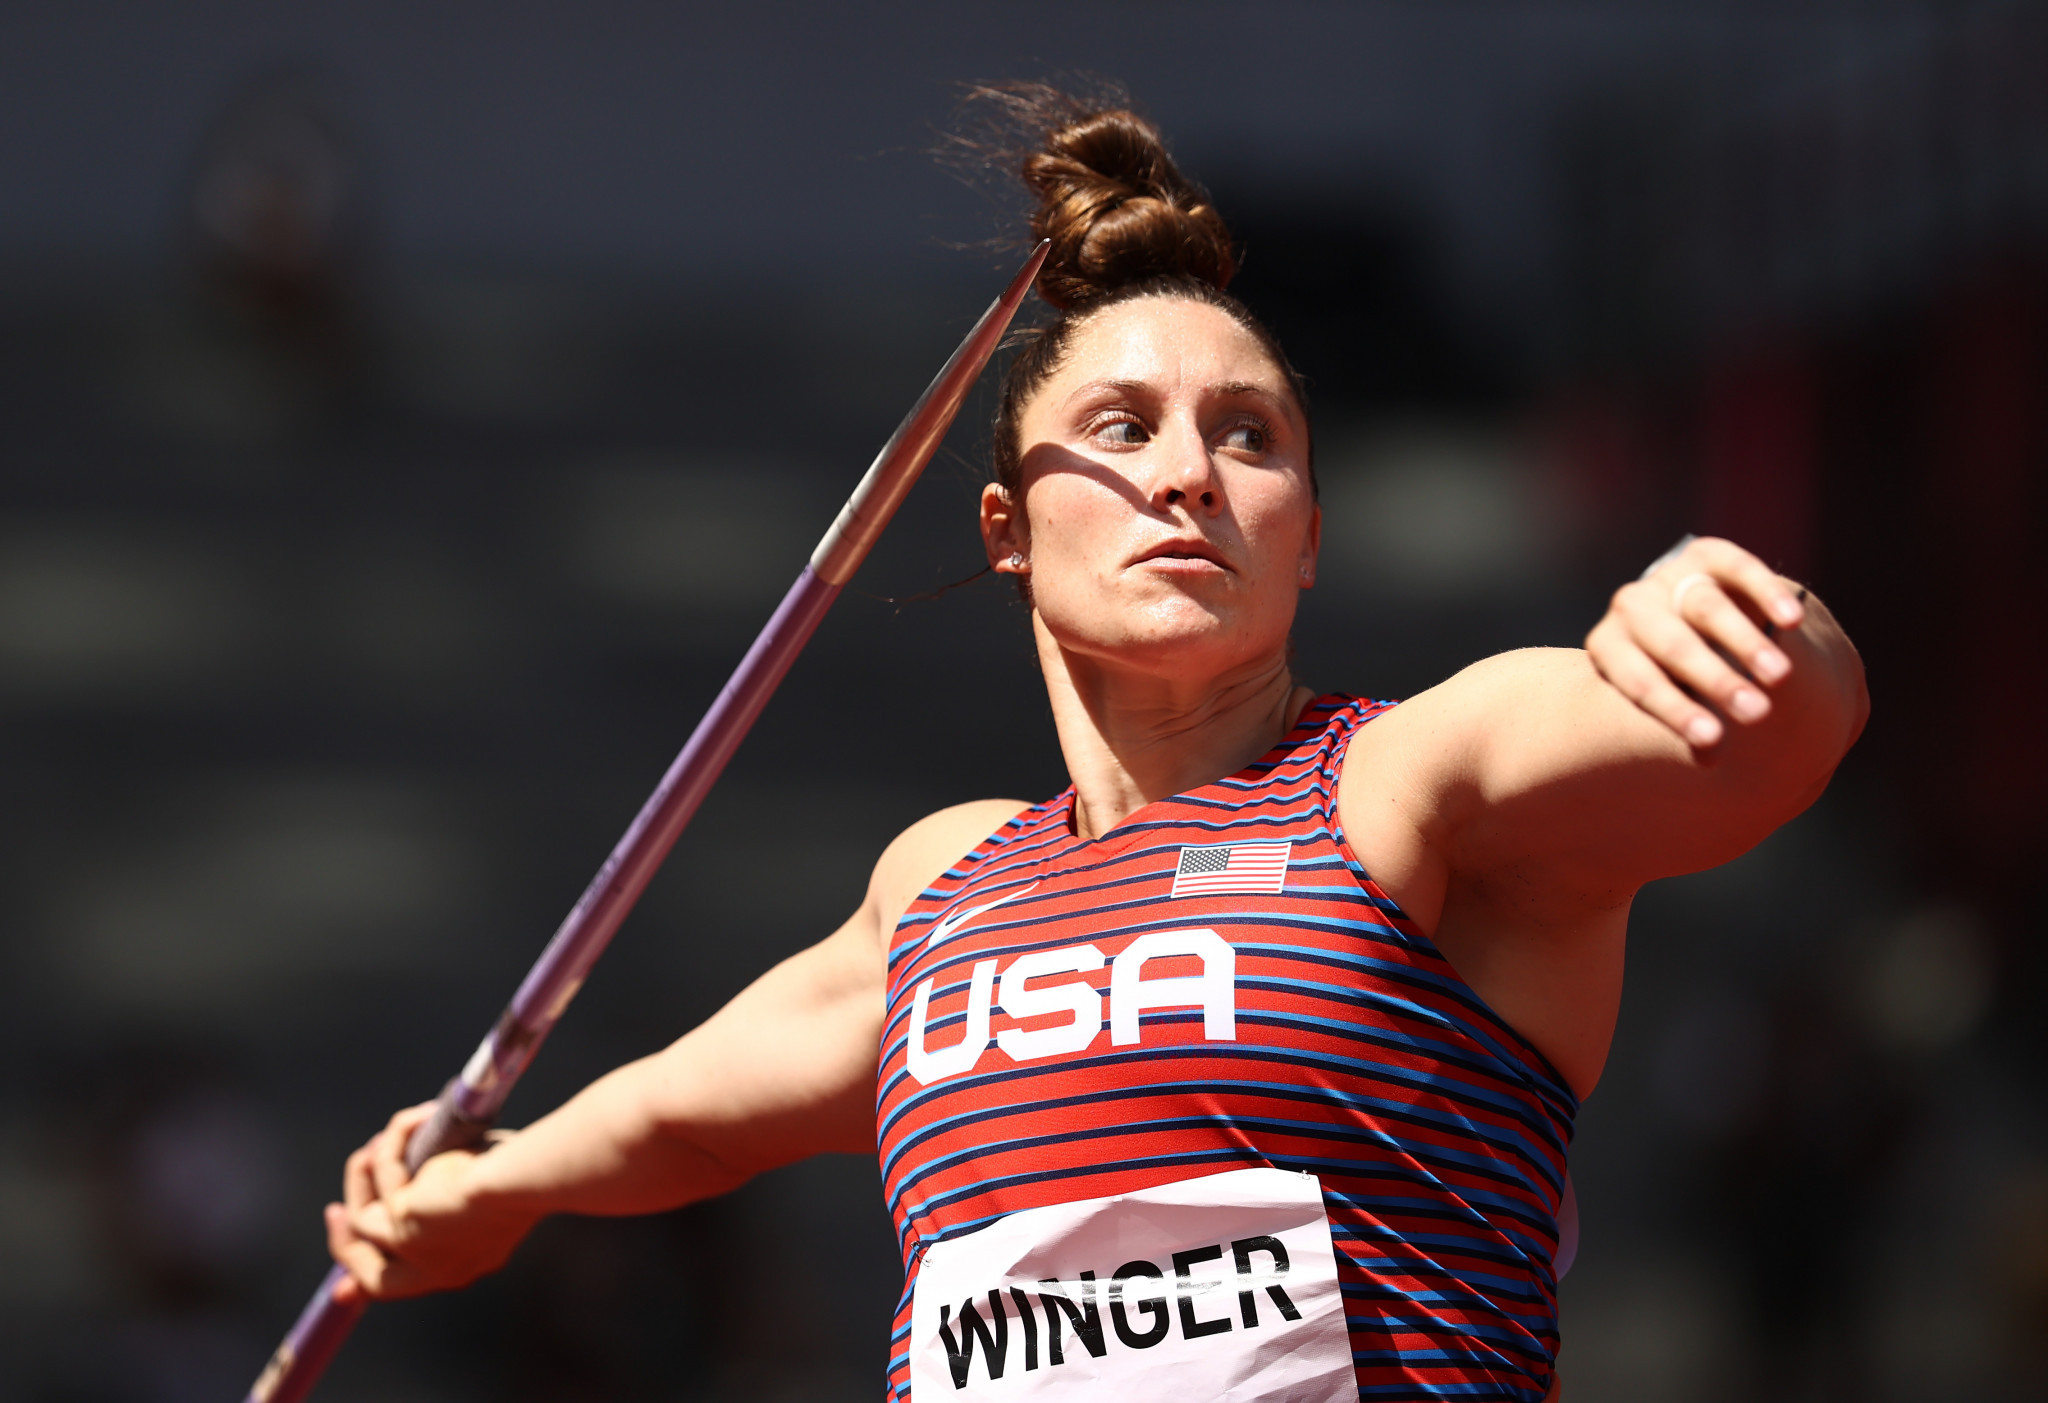 Javelin thrower Kara Winger is set to carry the United States flag at the Tokyo 2020 Closing Ceremony ©Getty Images